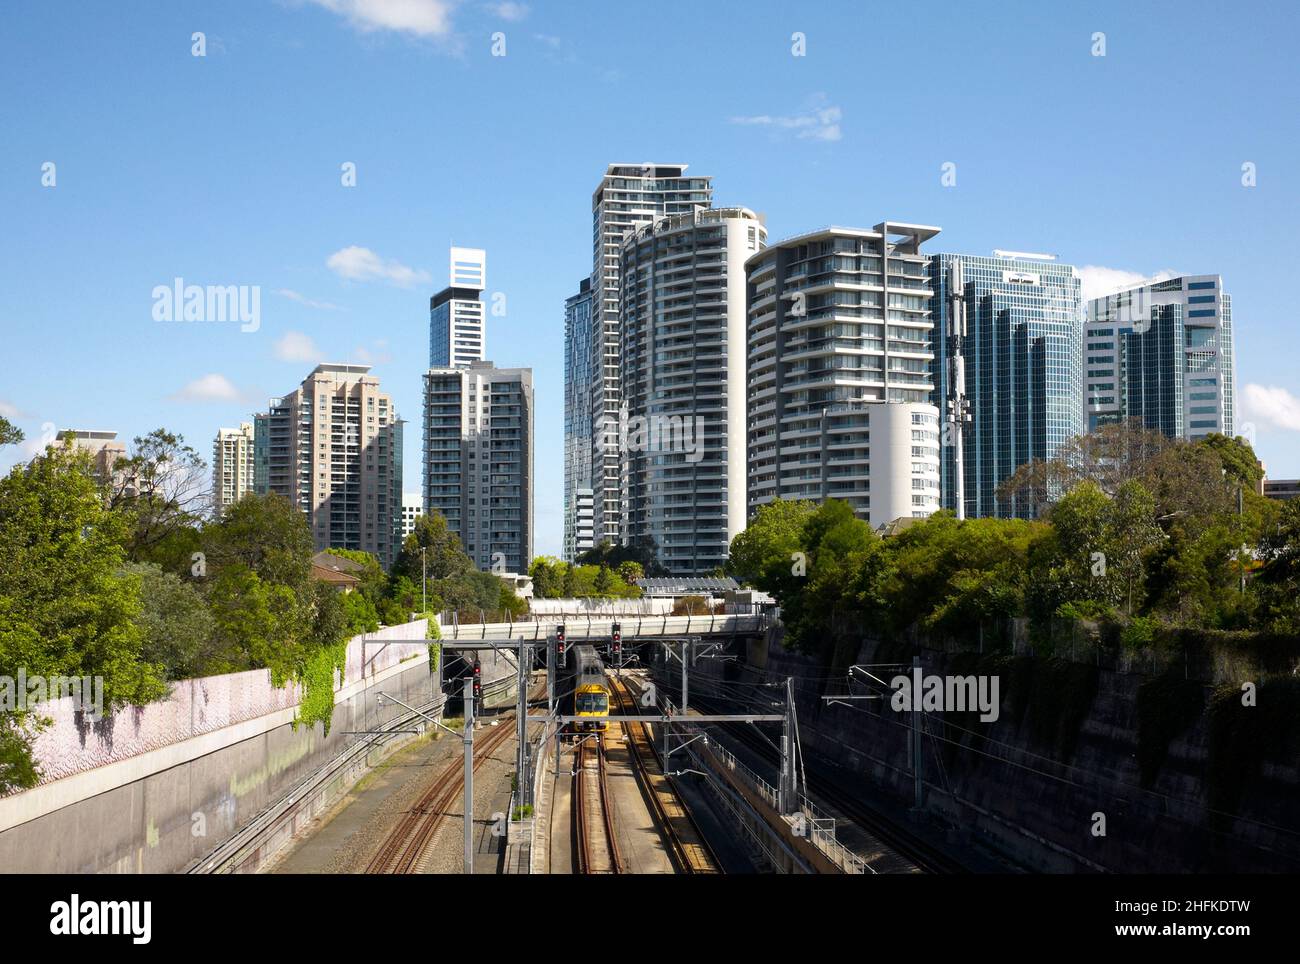 Colour photograph of High-rise urban development and railway, Chatswood Central Business District, Chatswood, Sydney, New South Wales, Australia, 2016. Stock Photo